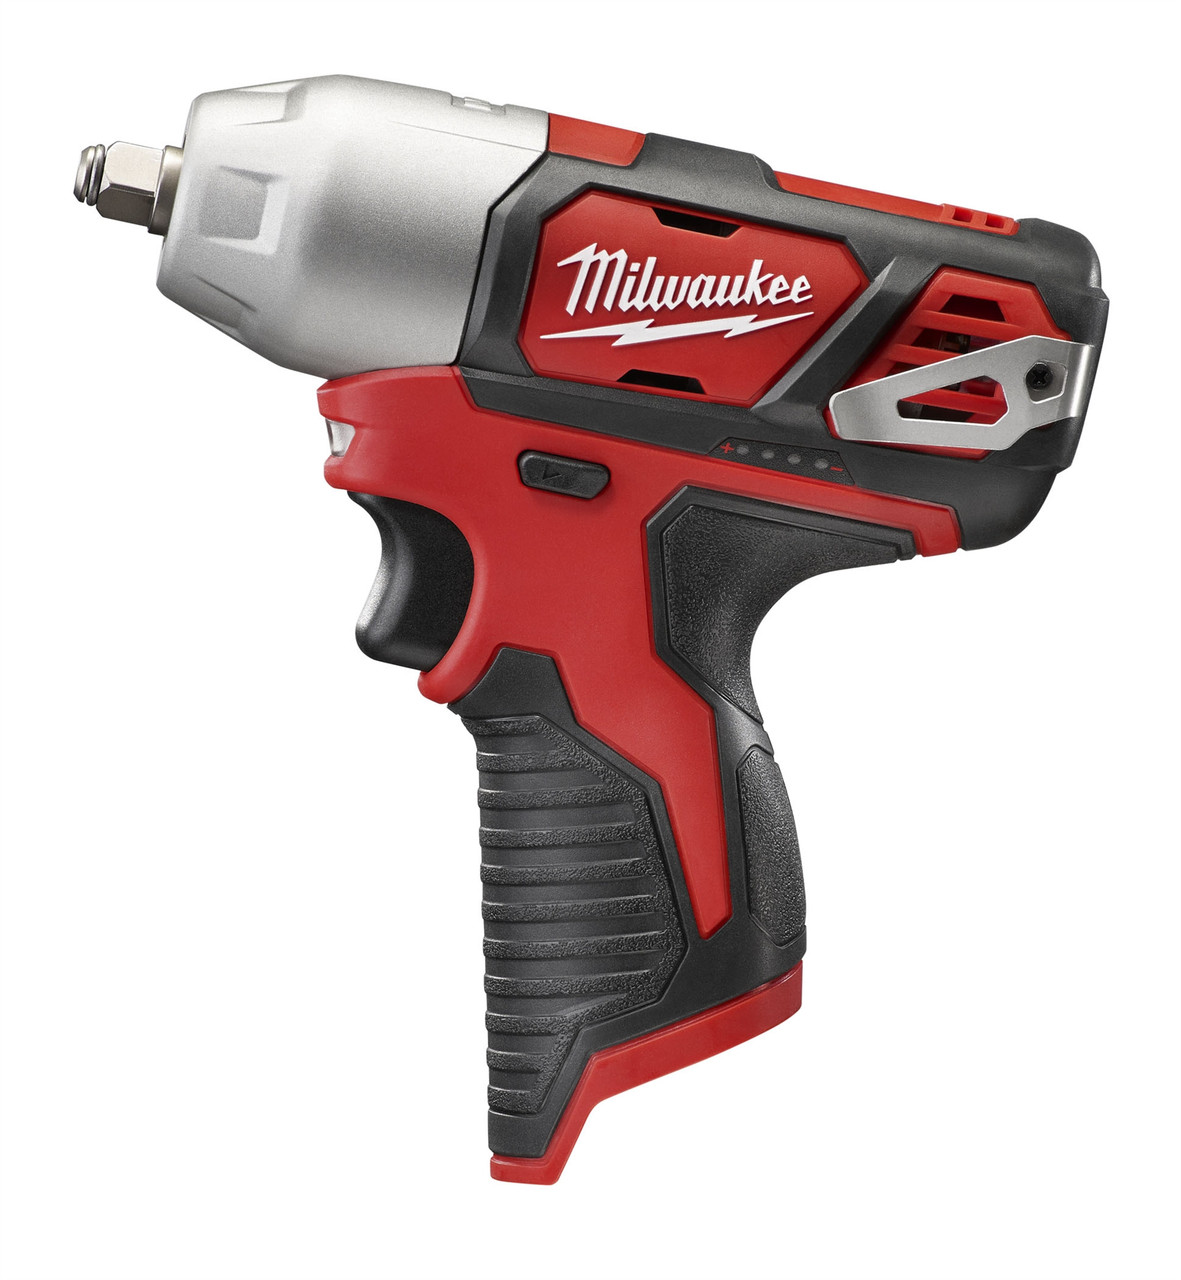 Milwaukee 2463-20 M12 3/8 in. Impact Wrench